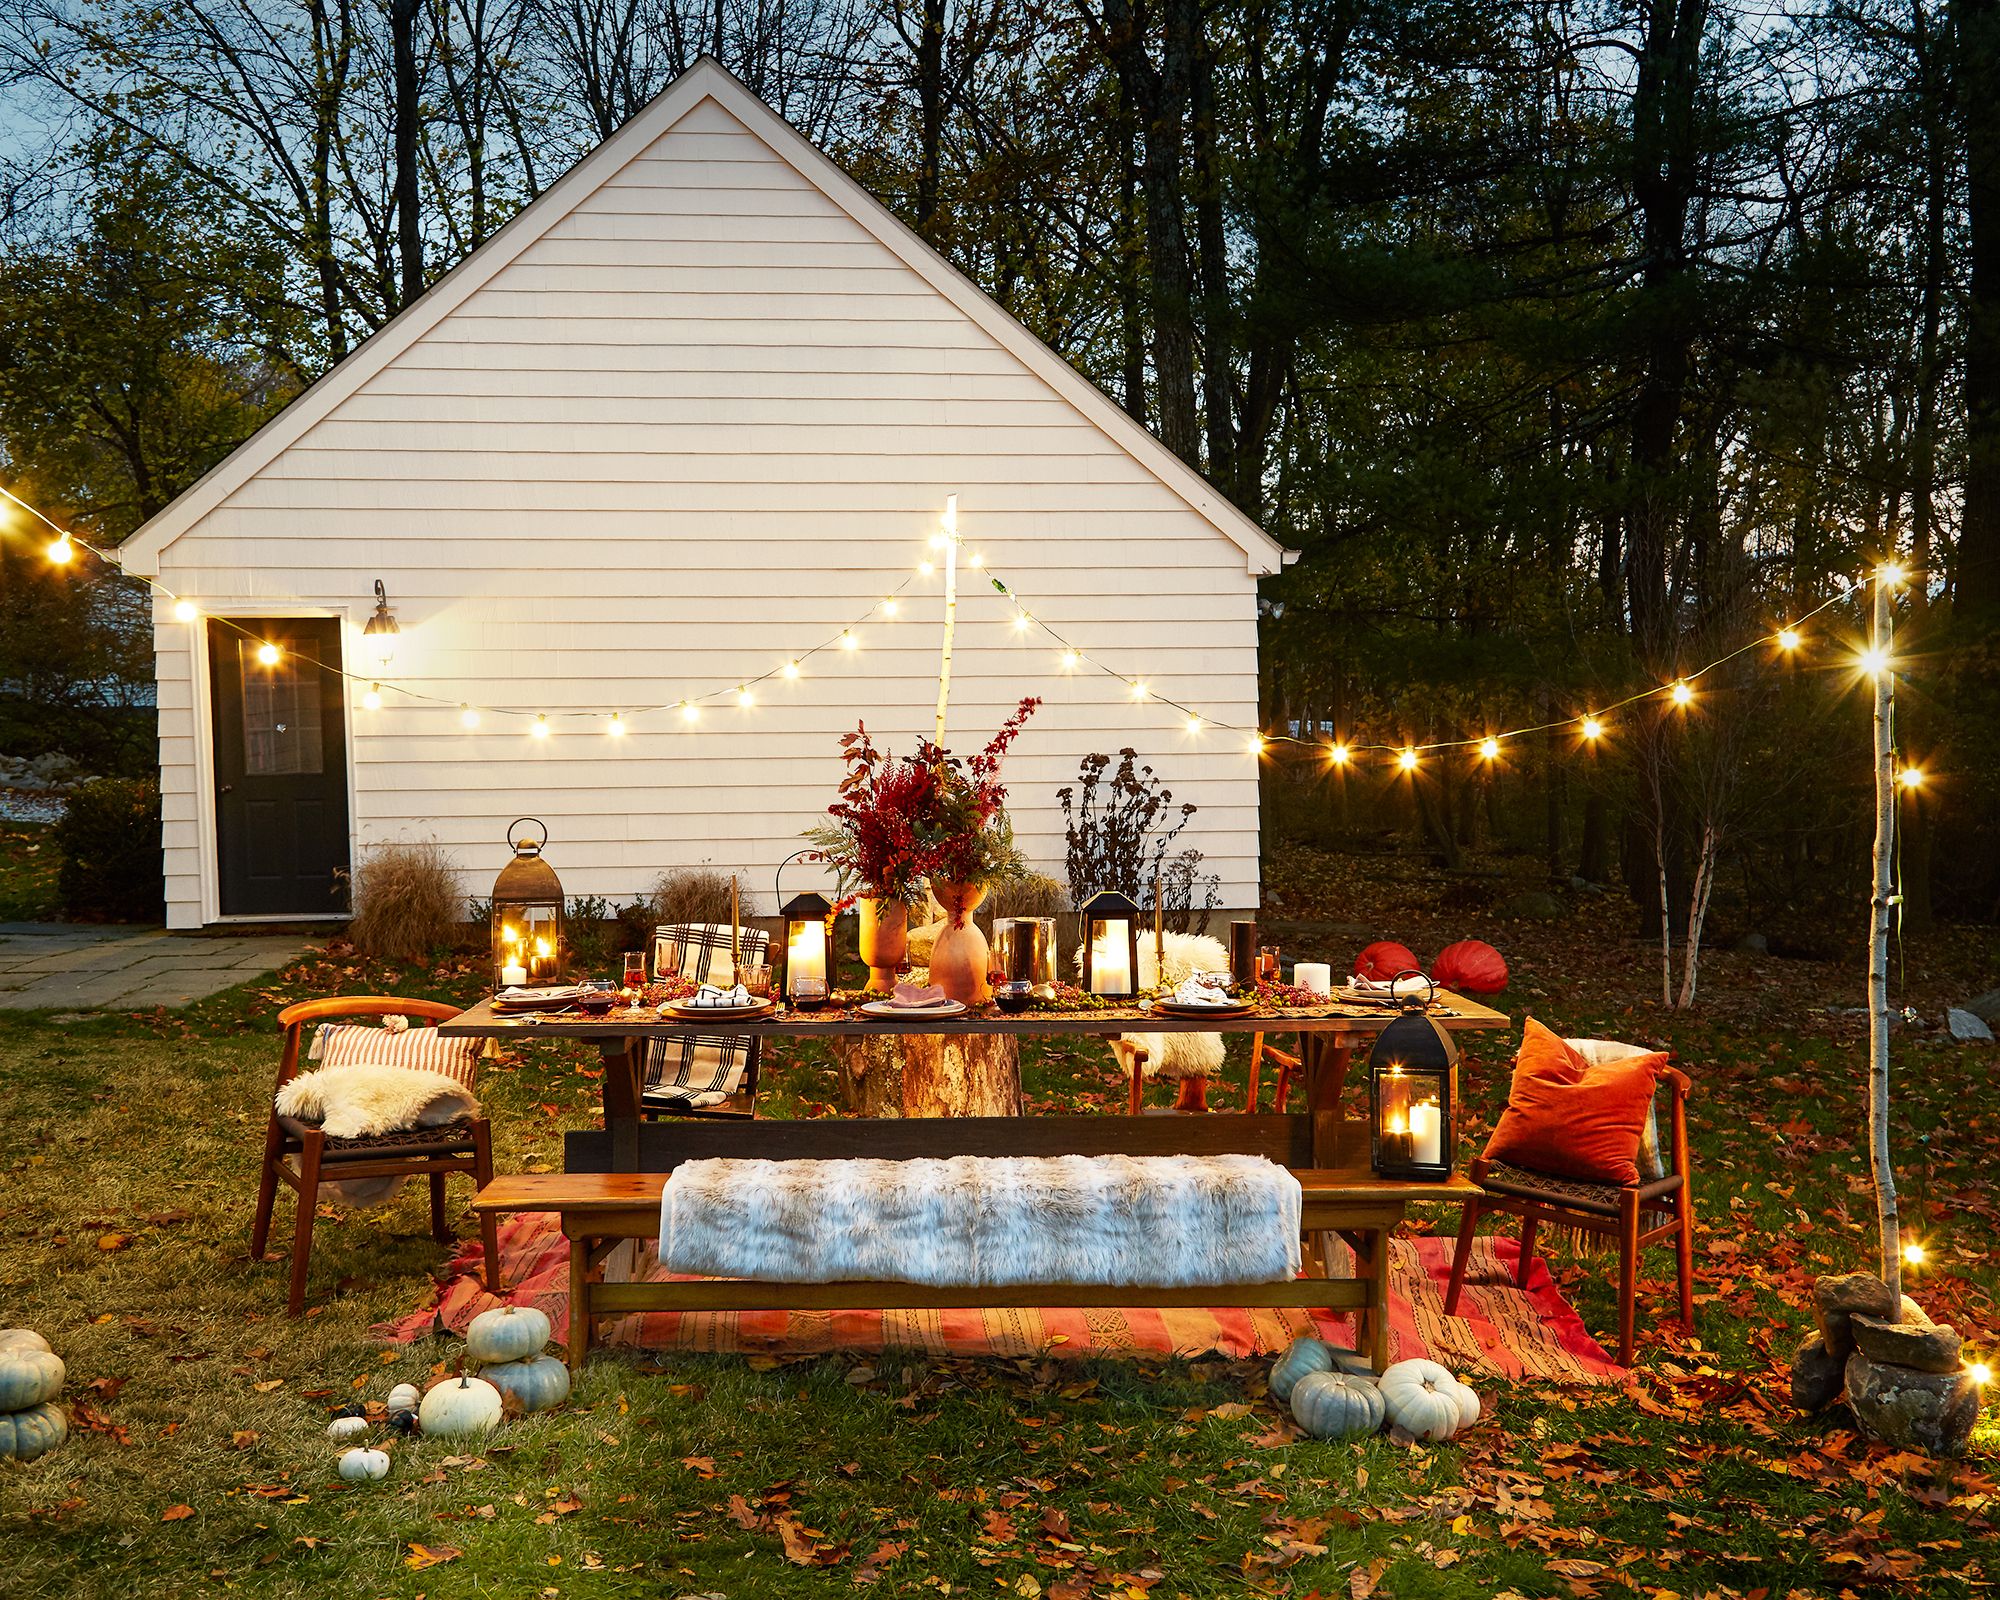 Festive Fall Decor for Your Home or Barn - STABLE STYLE